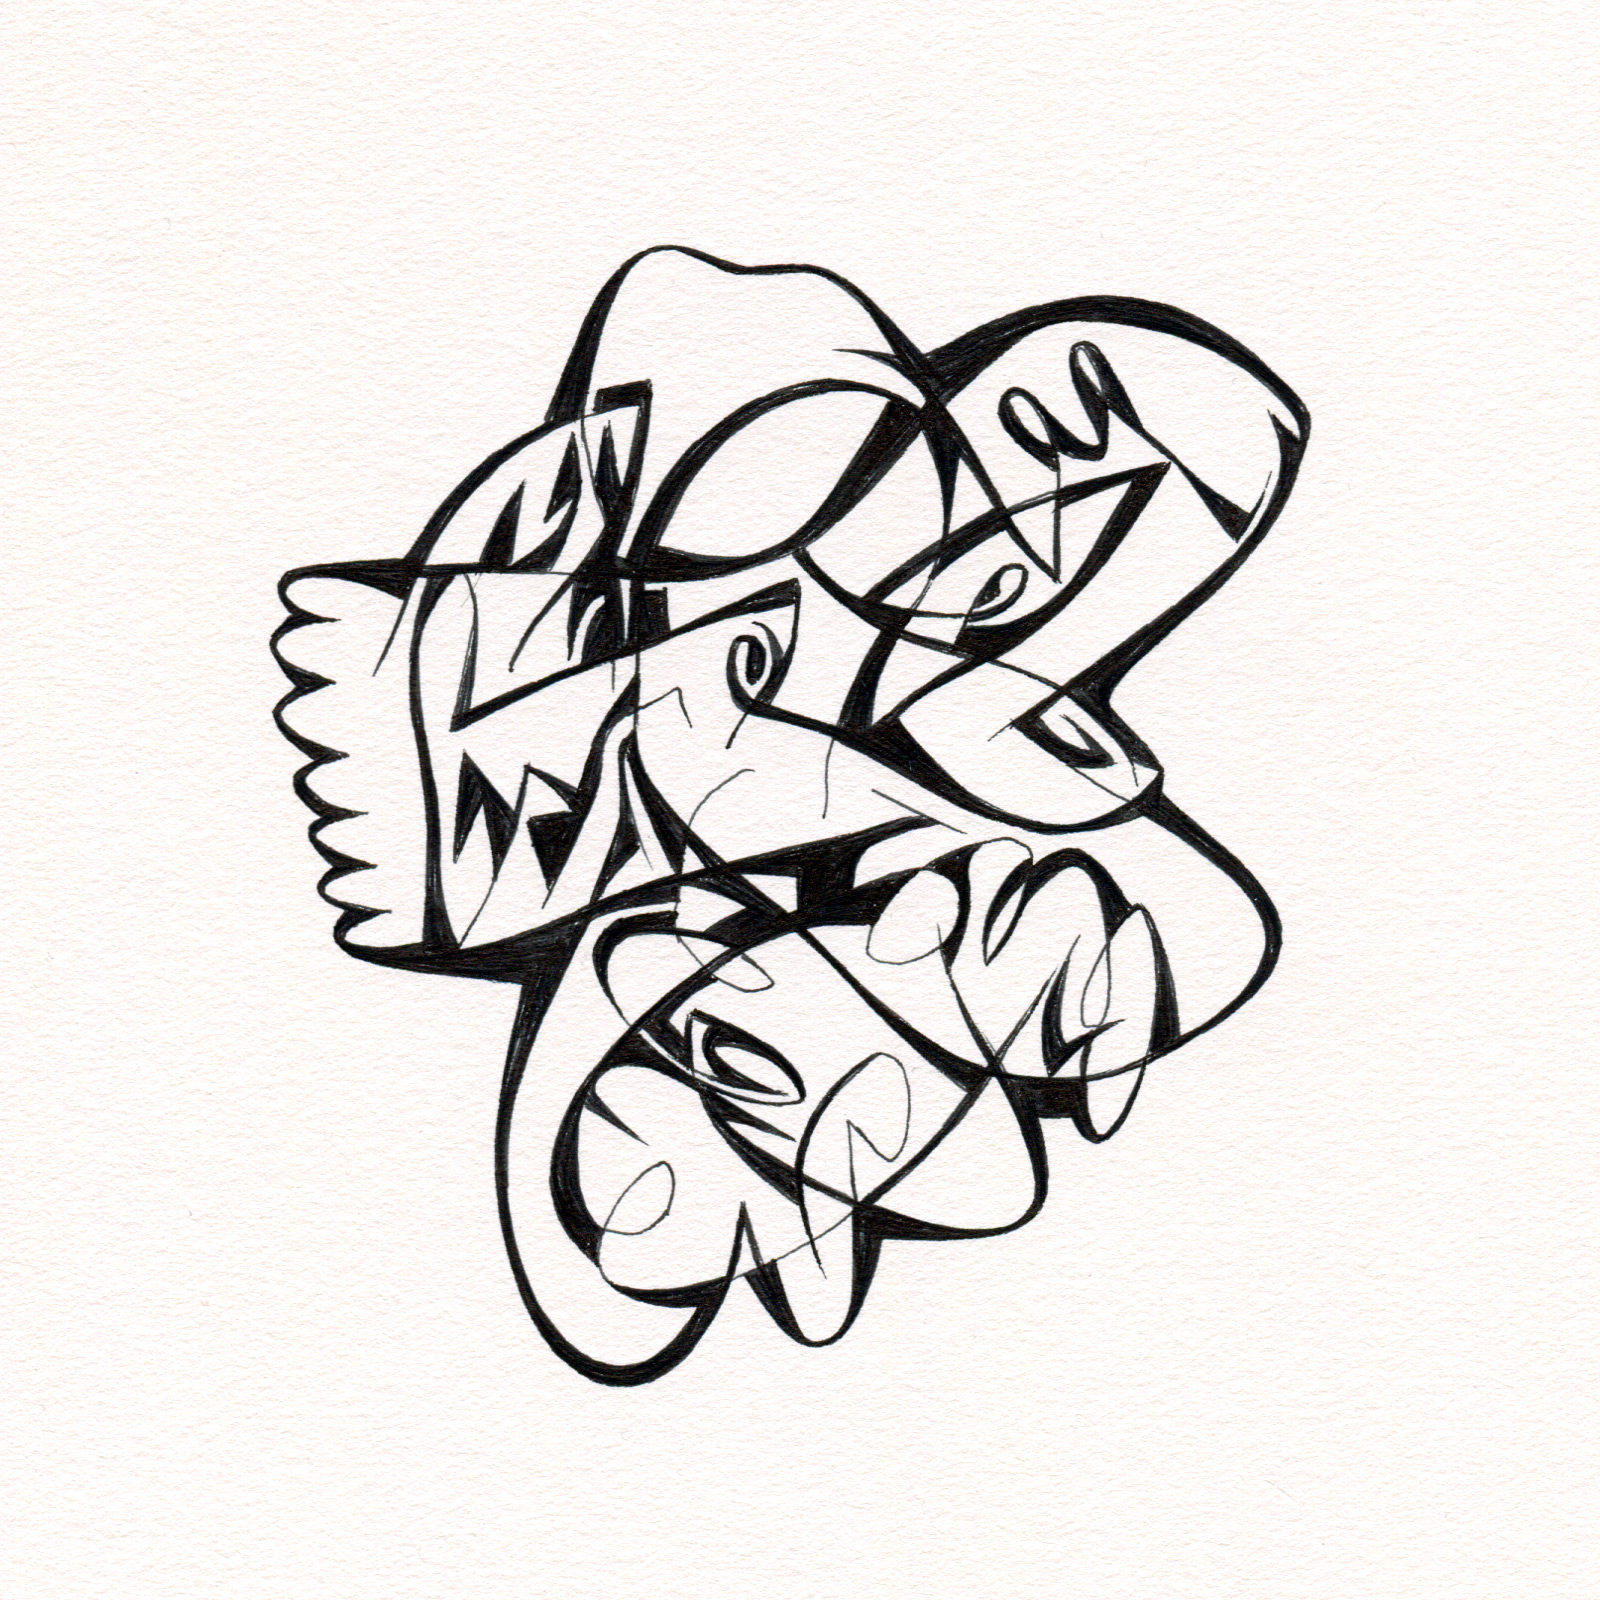   Untitled Ink Drawing #63 , 2015. Ink on paper. Approximately 5" x 5". 